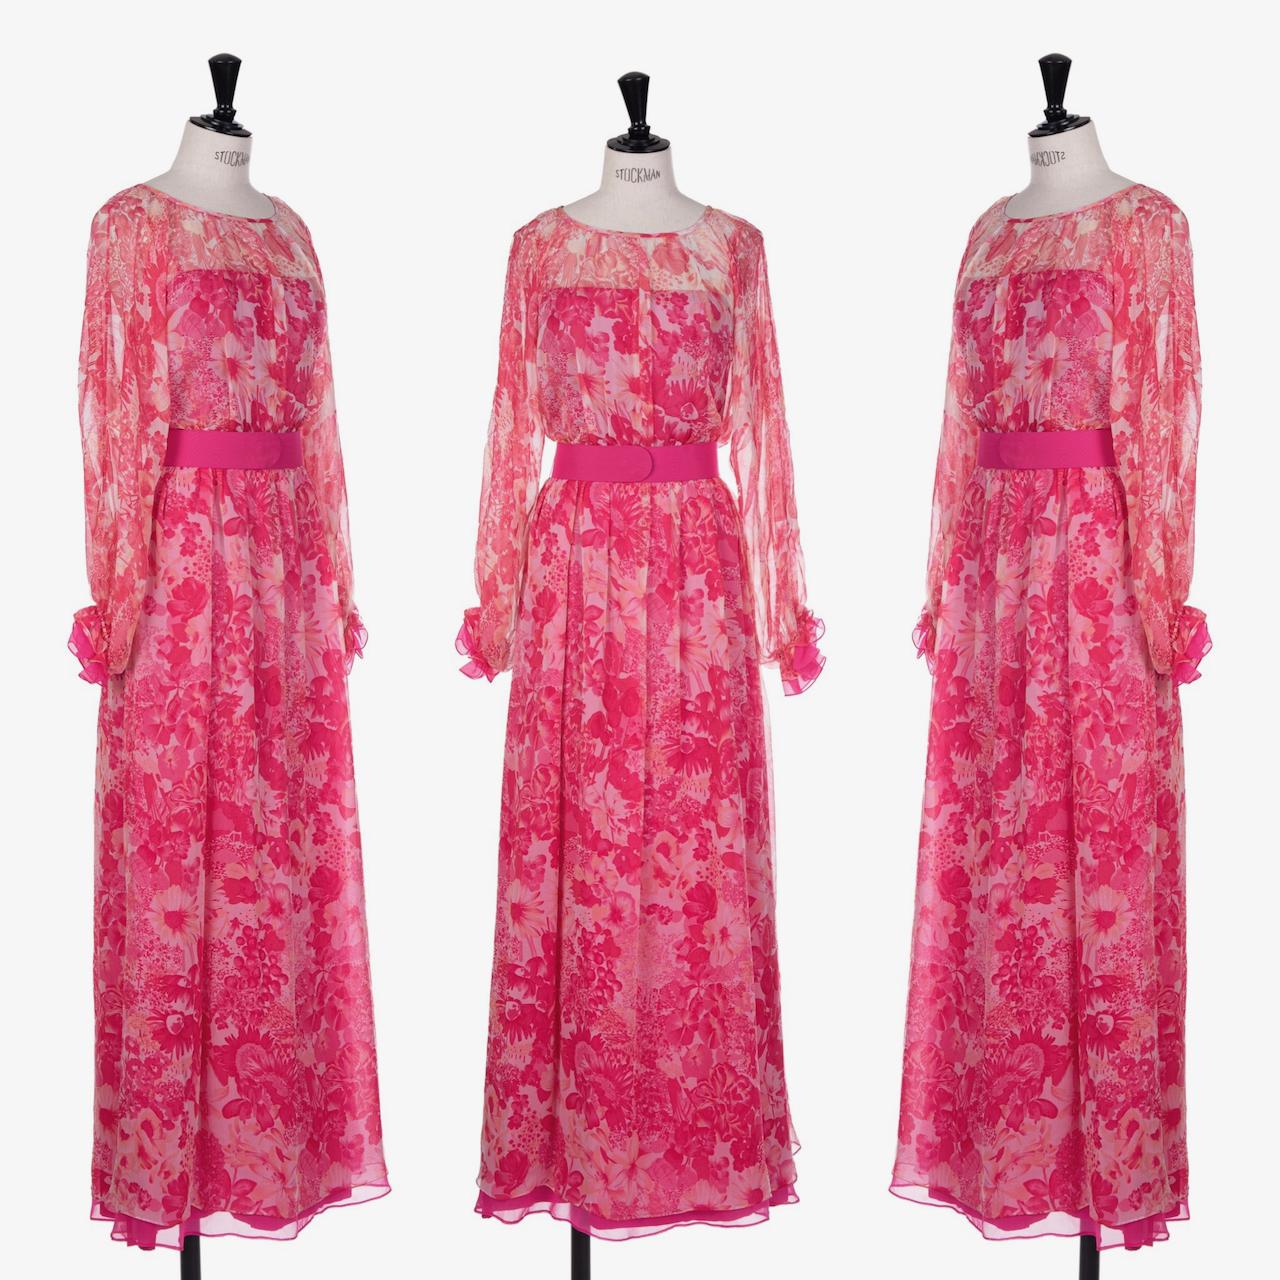 This is a romantic 1970s layered silk chiffon maxi dress by E. Braun & Co. who was a high-class clothing store established by the brothers Emanuel and Josef Braun in Vienna, Austria, in 1892. In 1911 they became purveyors to the Habsburg court. The